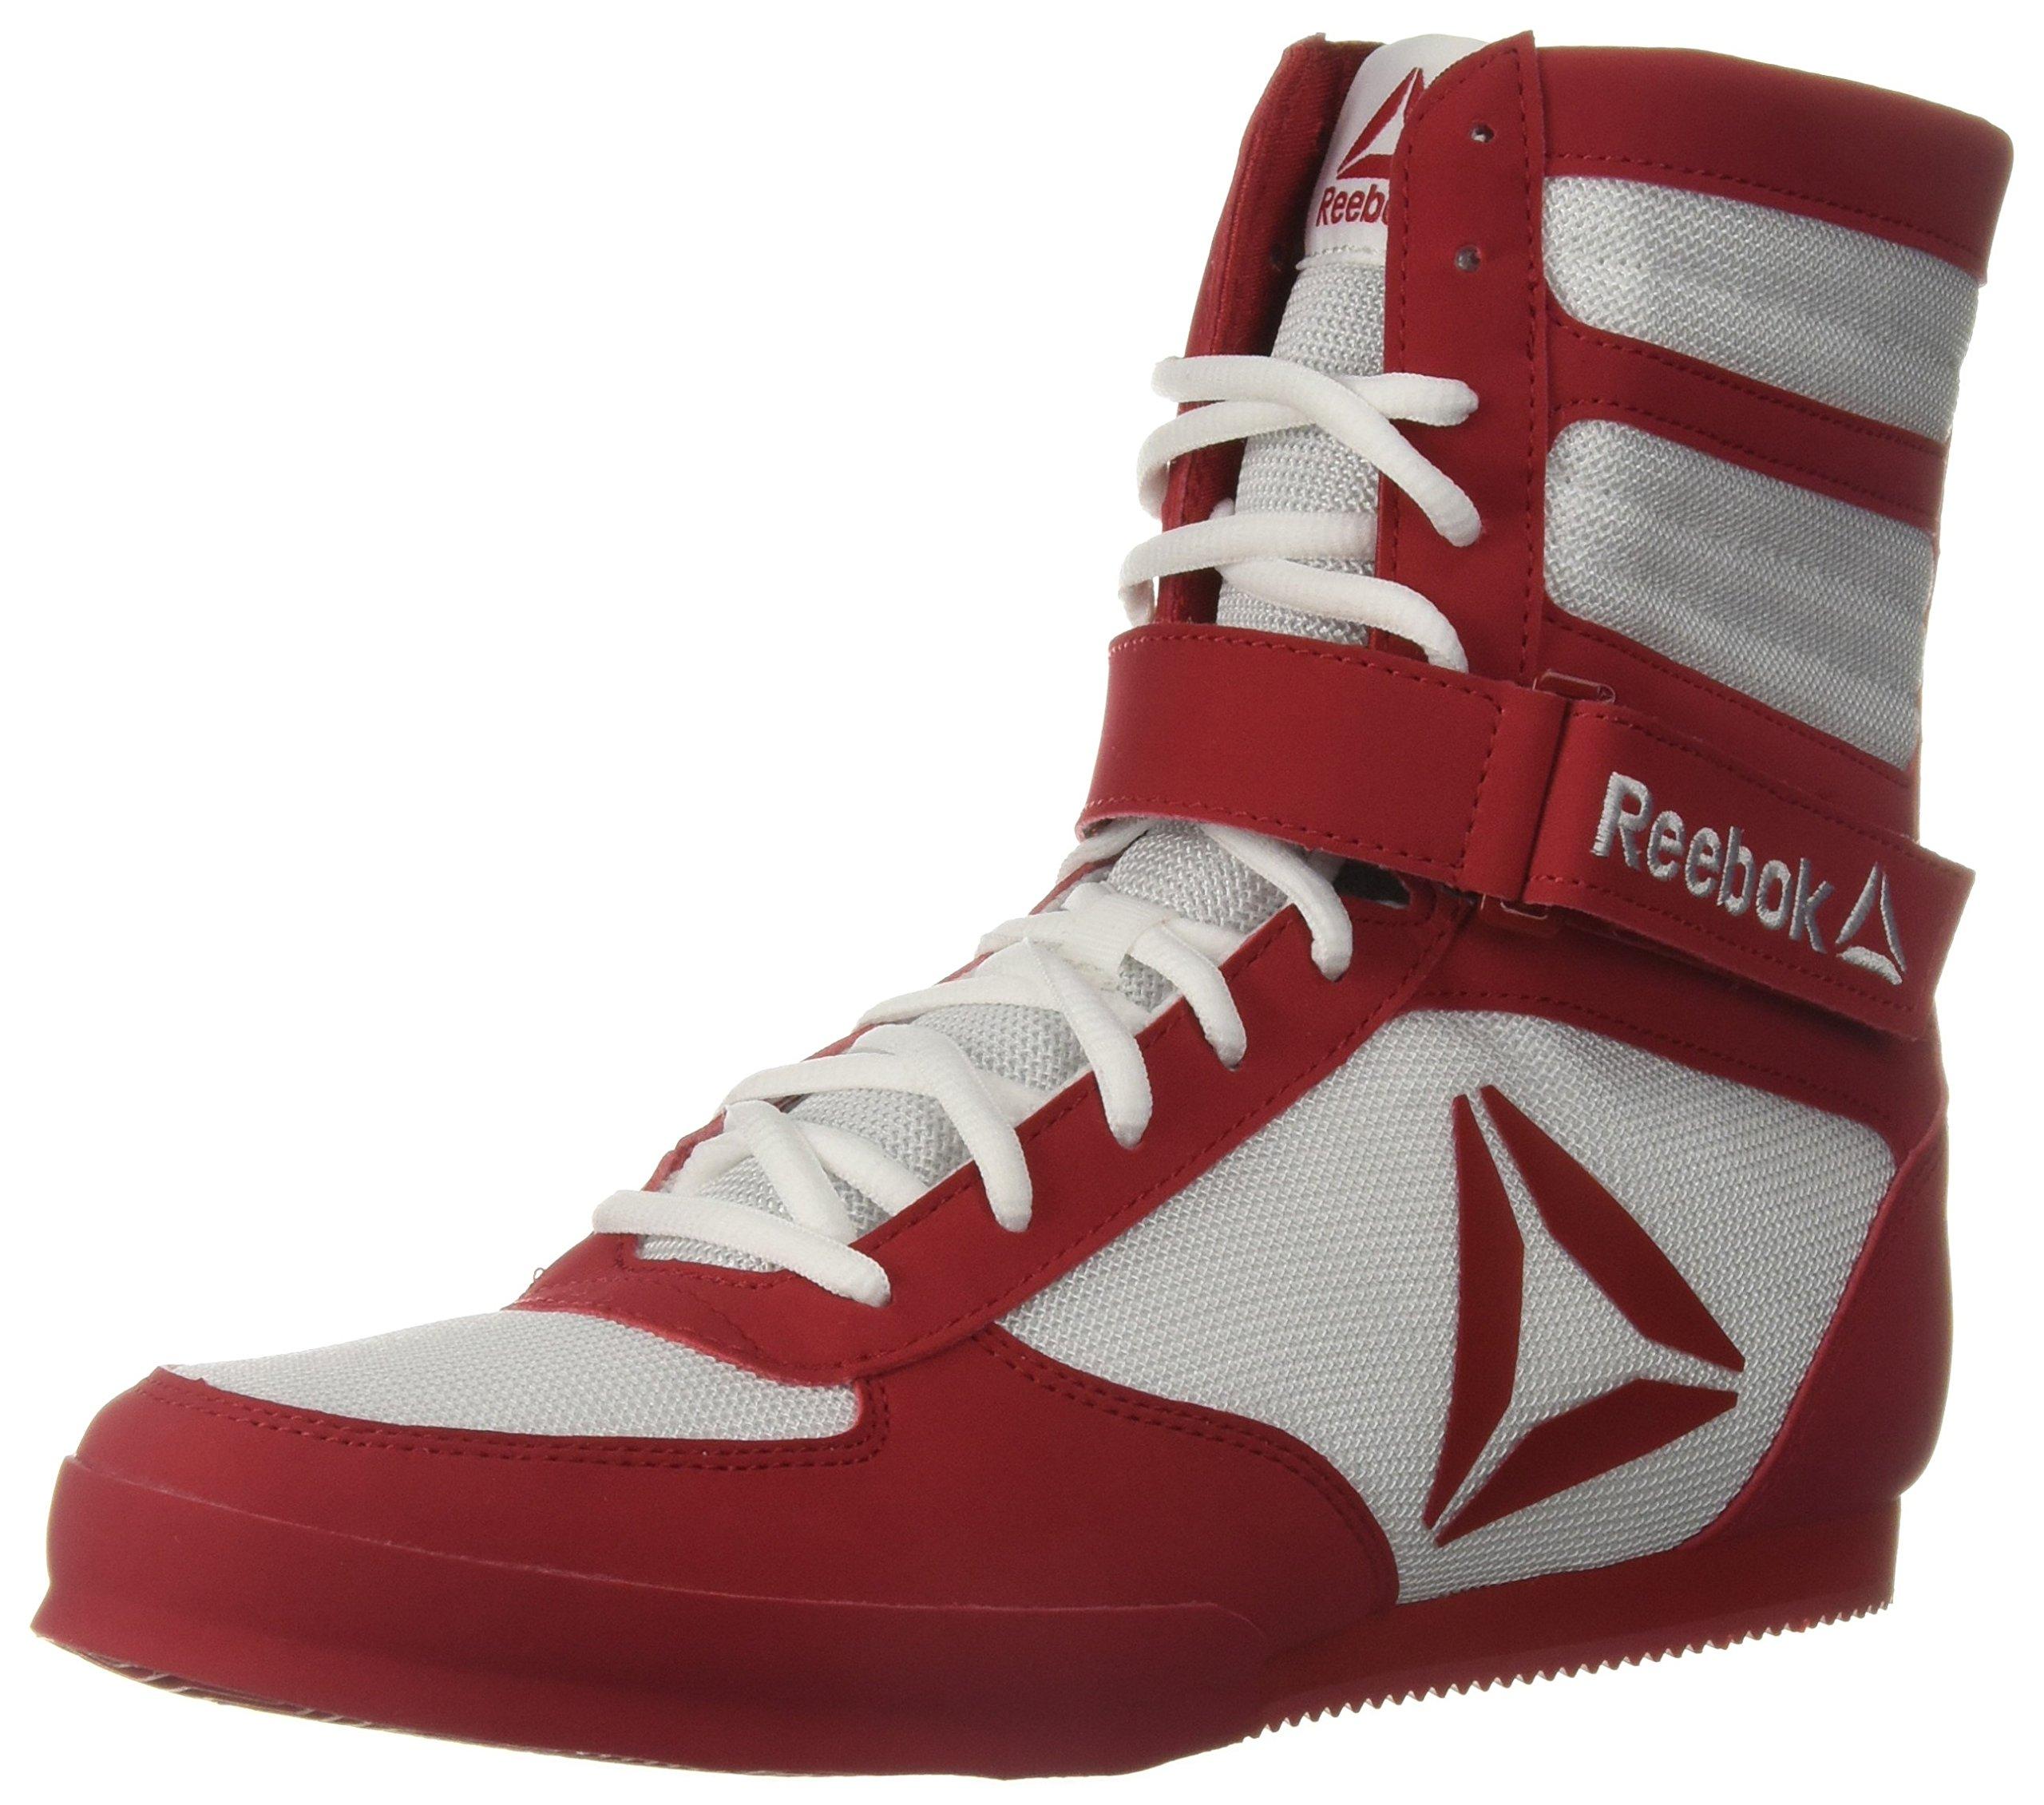 Reebok Leather Boot Boxing Shoe in Red 